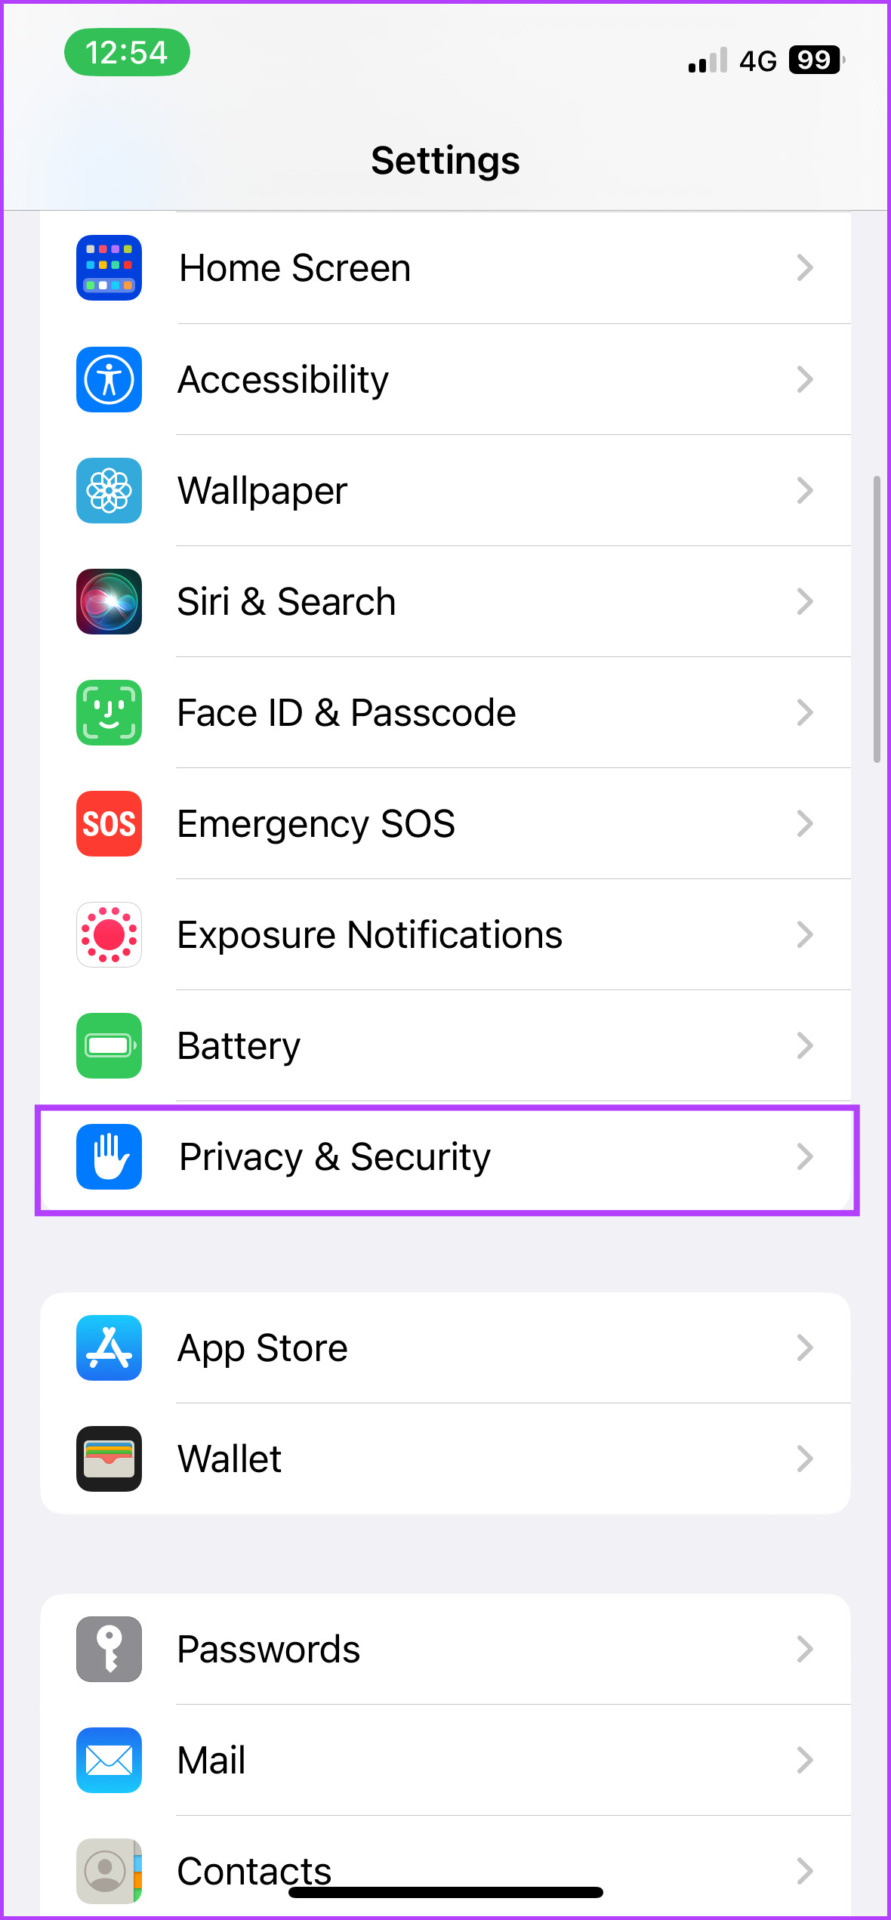 In Settings go to Privacy & Security